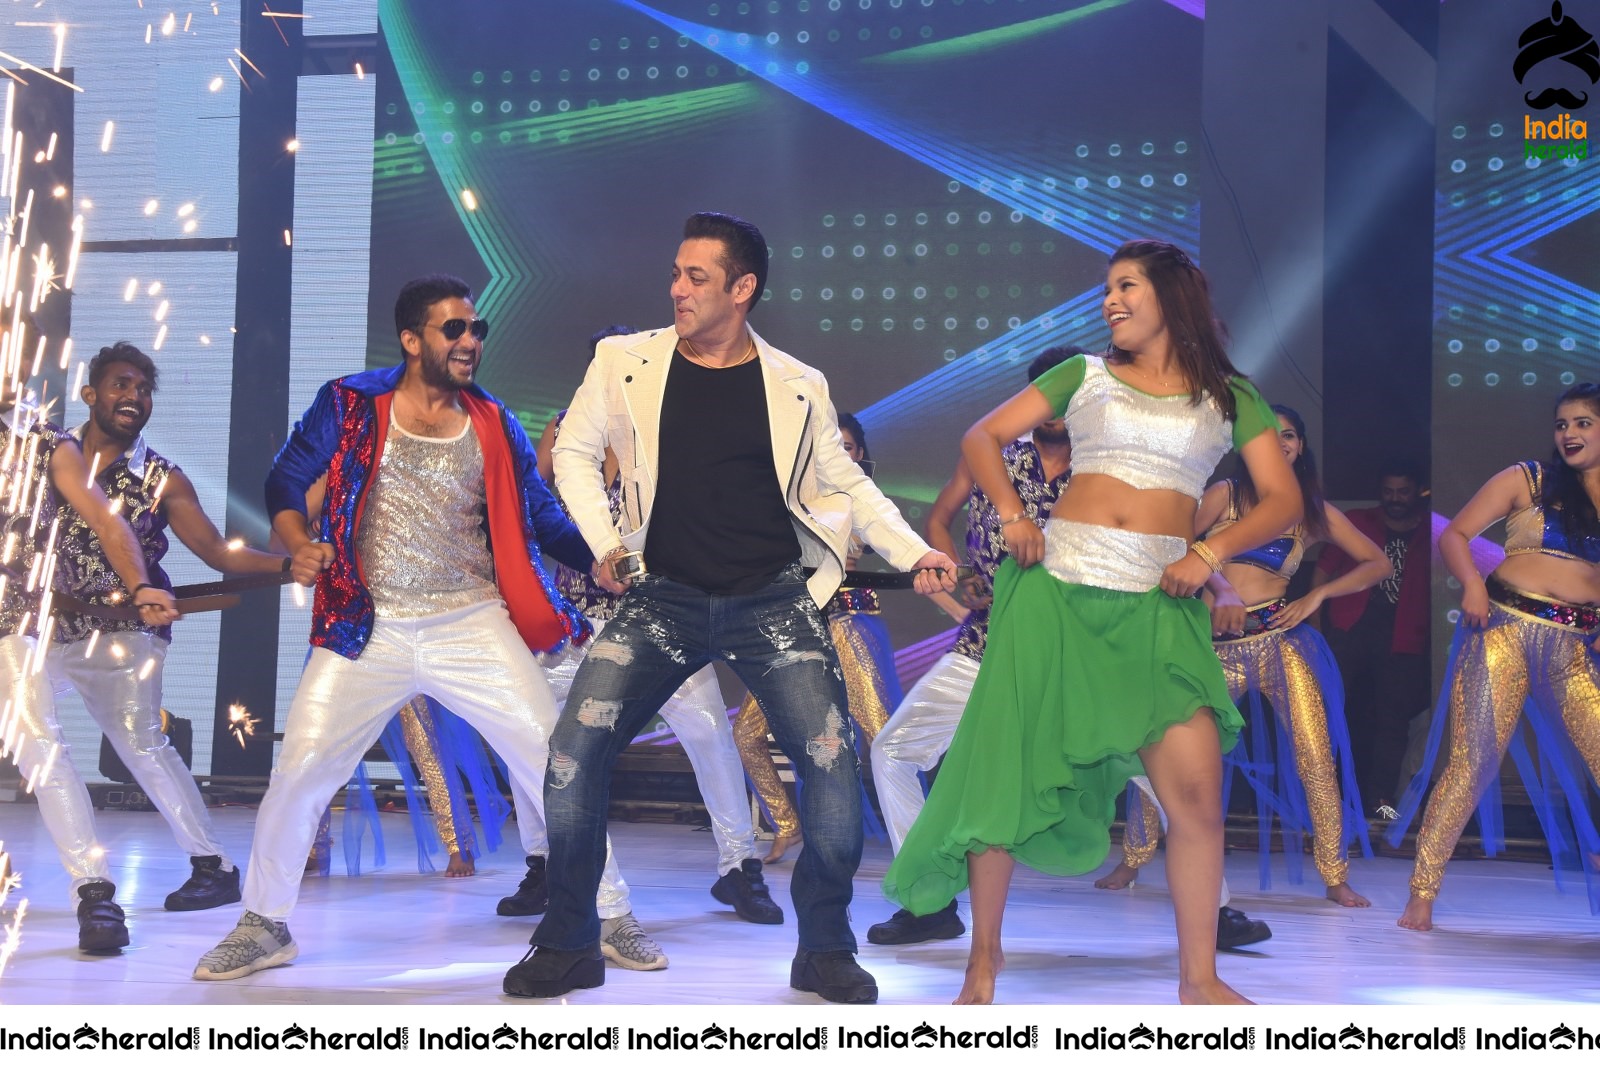 When Salman danced along with Tollywood Top Stars at Dabangg Event Set 1